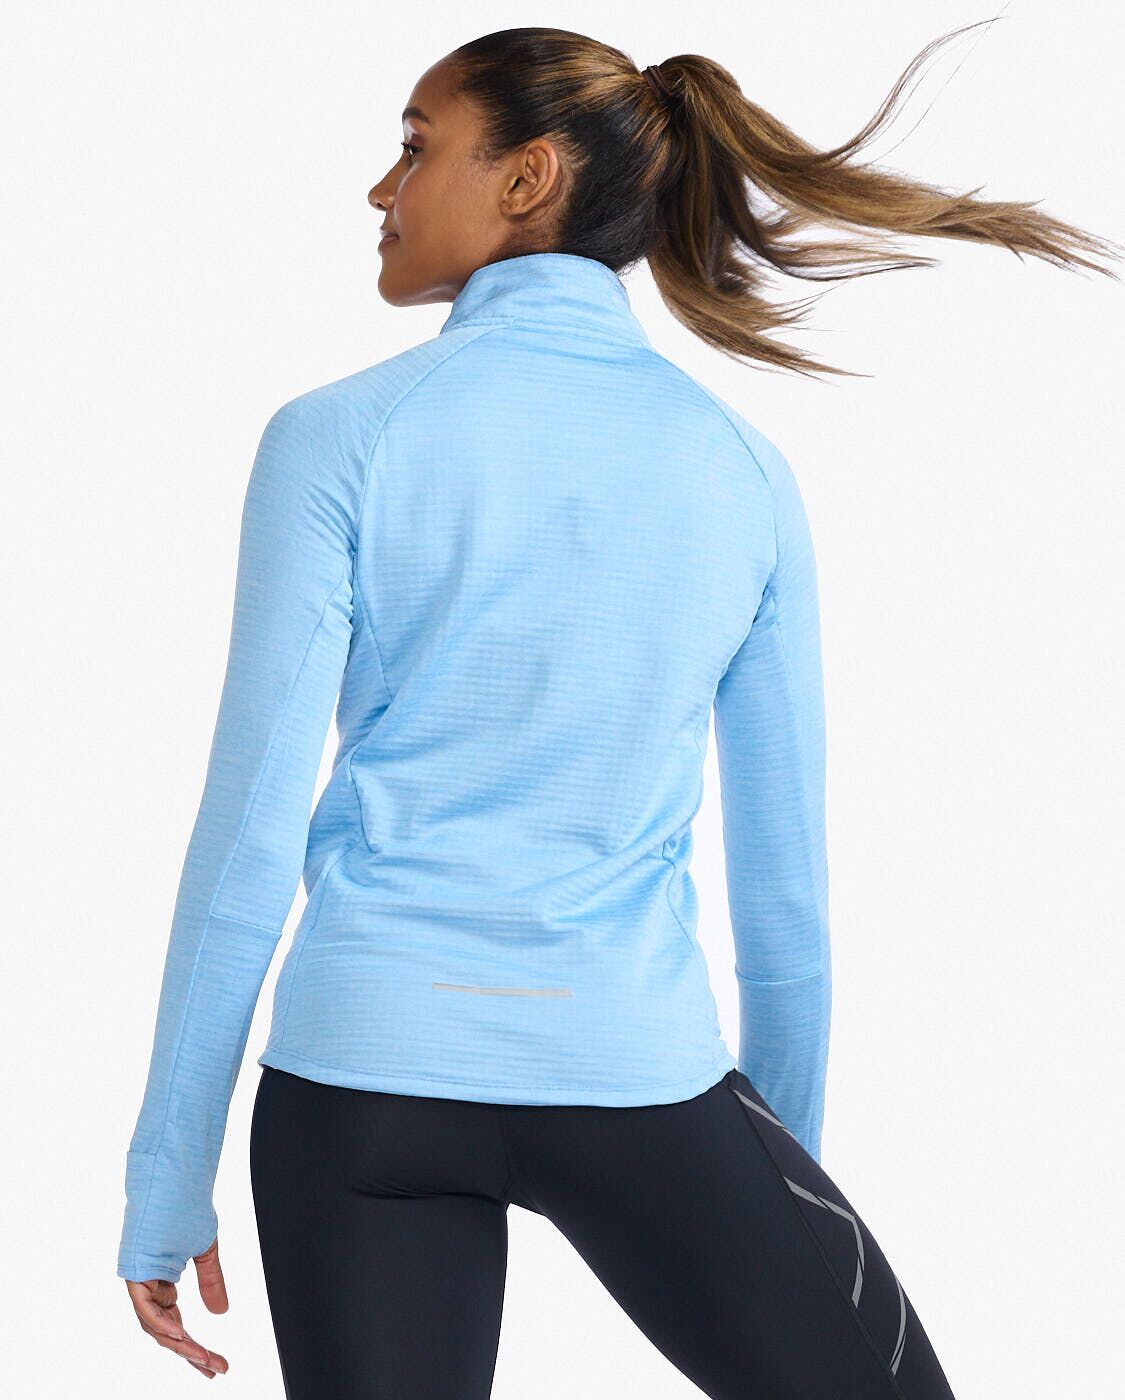 2XU South Africa - Women's Ignition Long Sleeve 1/4 Zip - Mirage/Silver Reflective